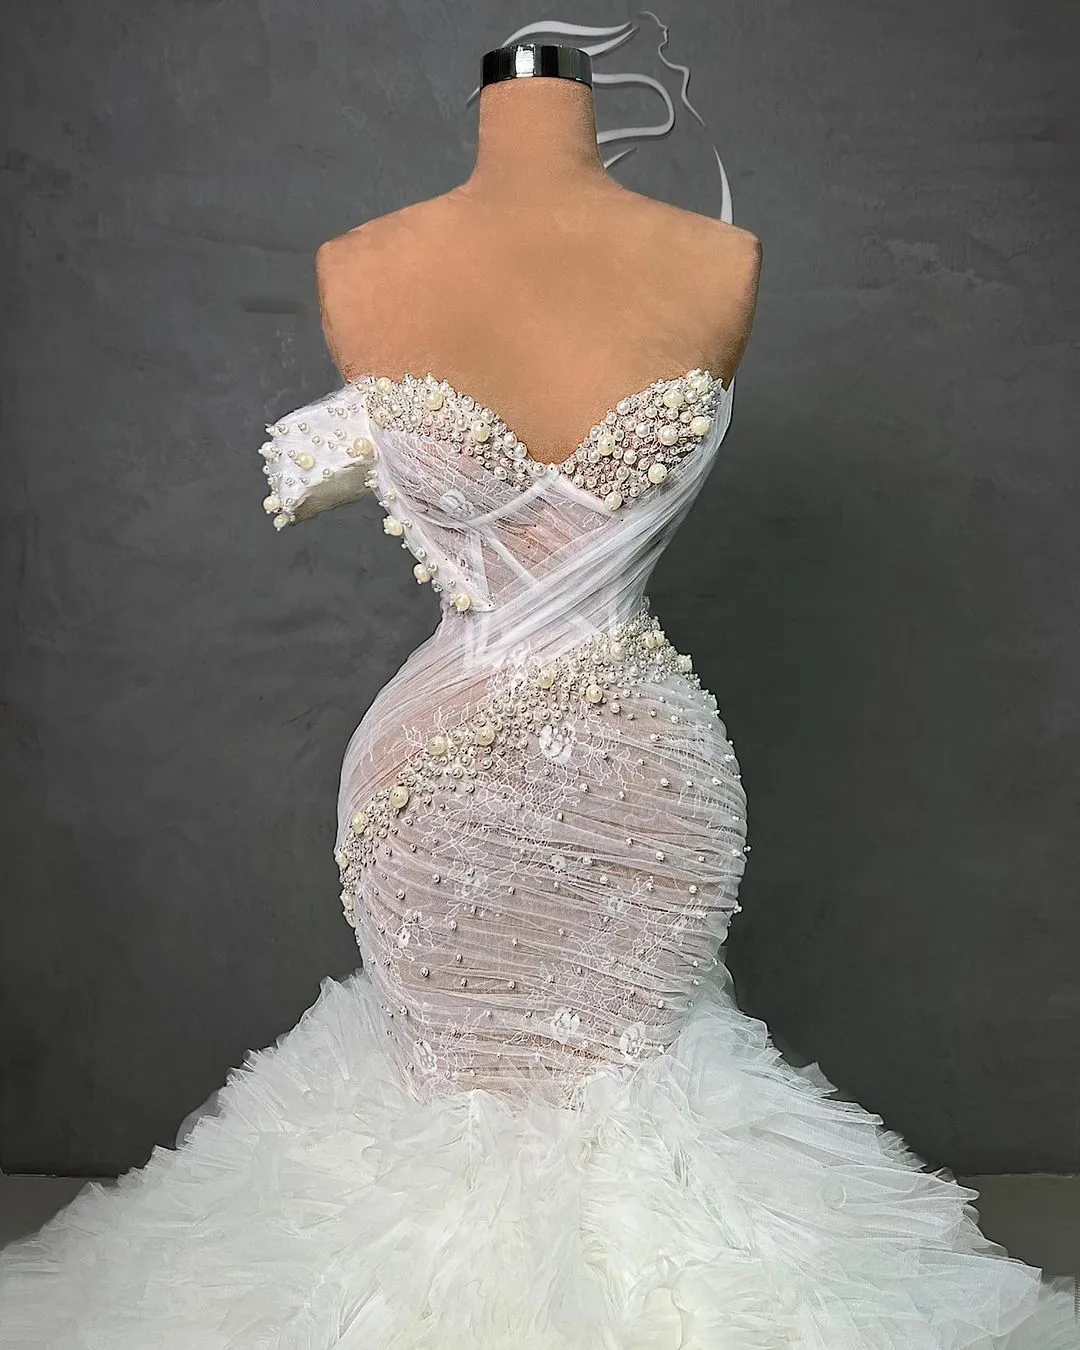 Gorgeous Mermaid Wedding Dresses Sweetheart Off the Shoulder Tulle Pearls Pleats Backless Zipper Court Gown Custom Made Plus Size Bridal Gown Vestidos De Novia